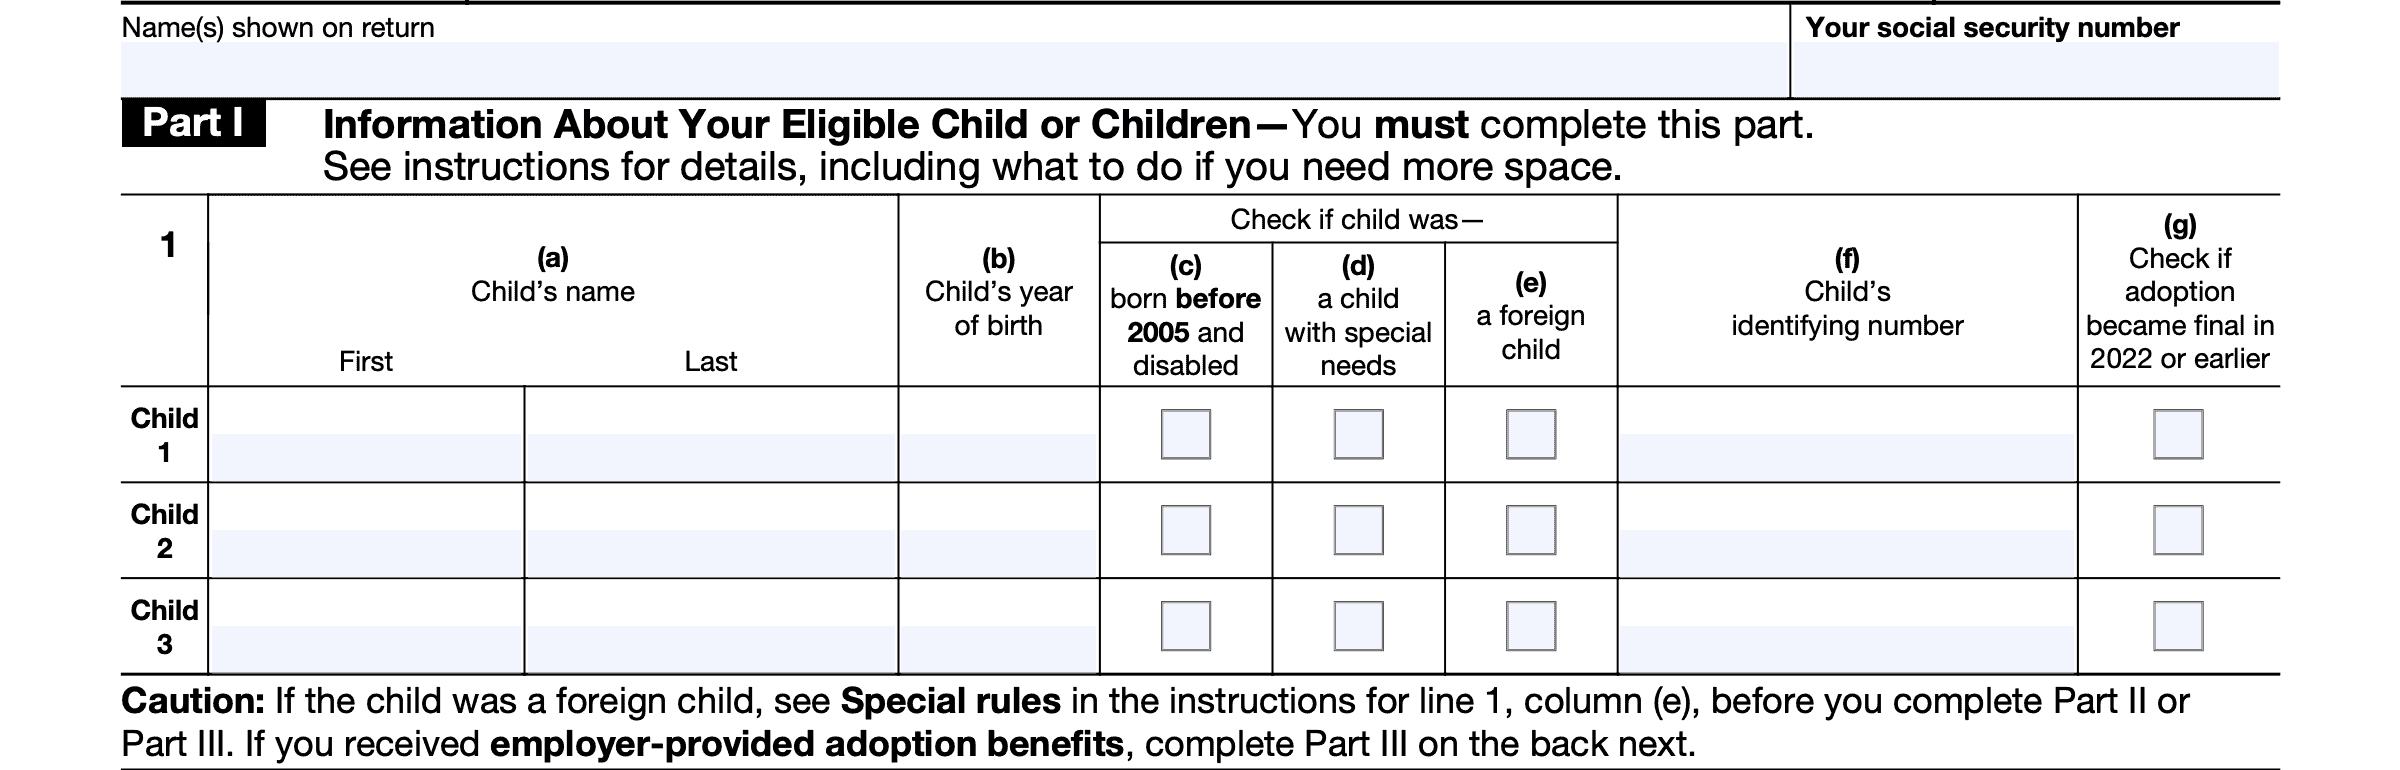 irs form 8839, part i: information about your eligible child or children